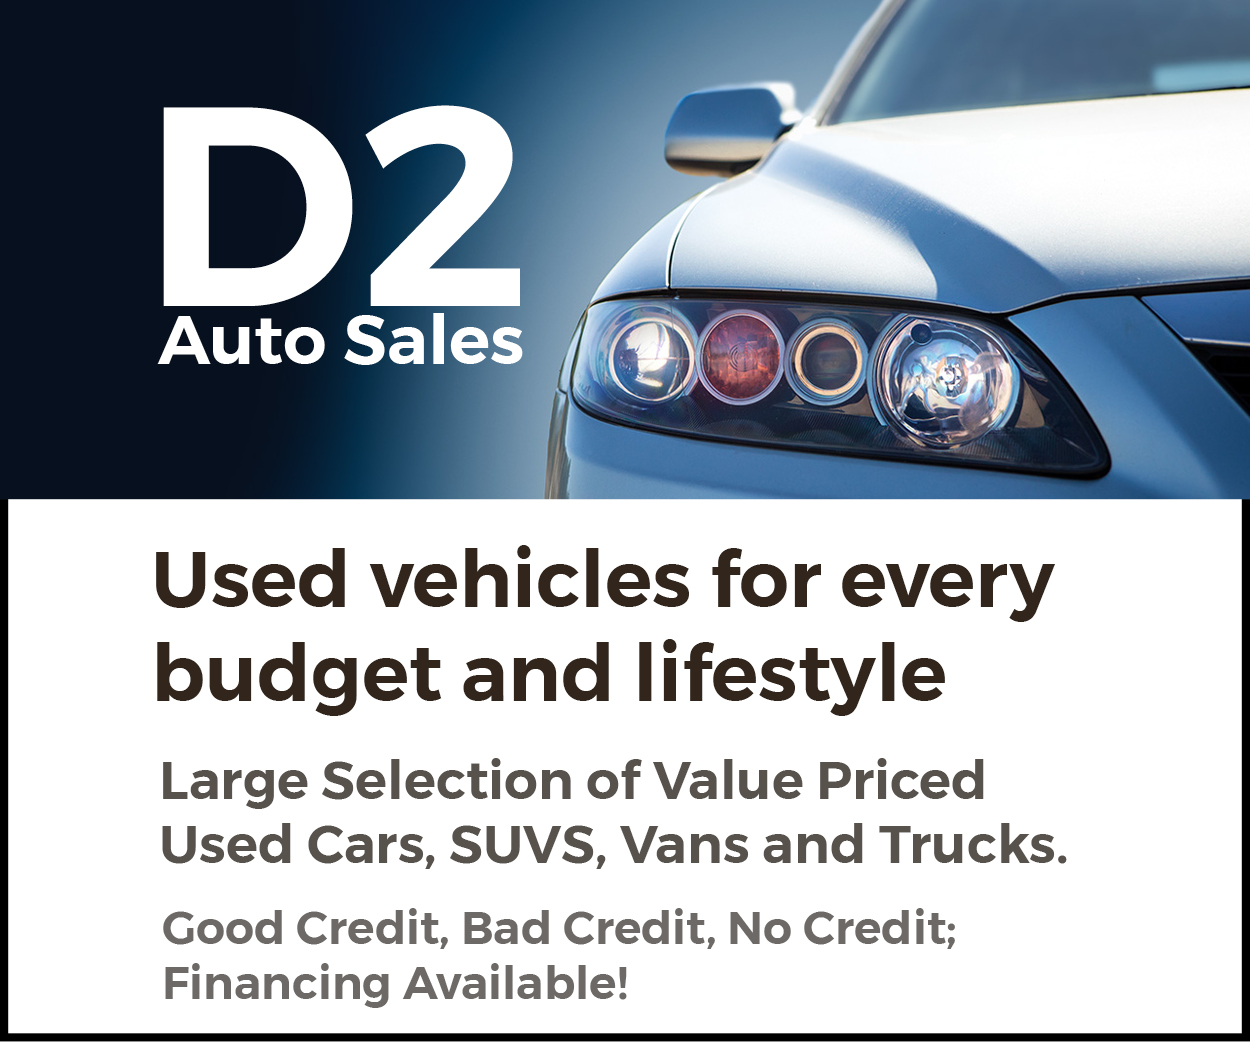 More from D2 Auto Sales